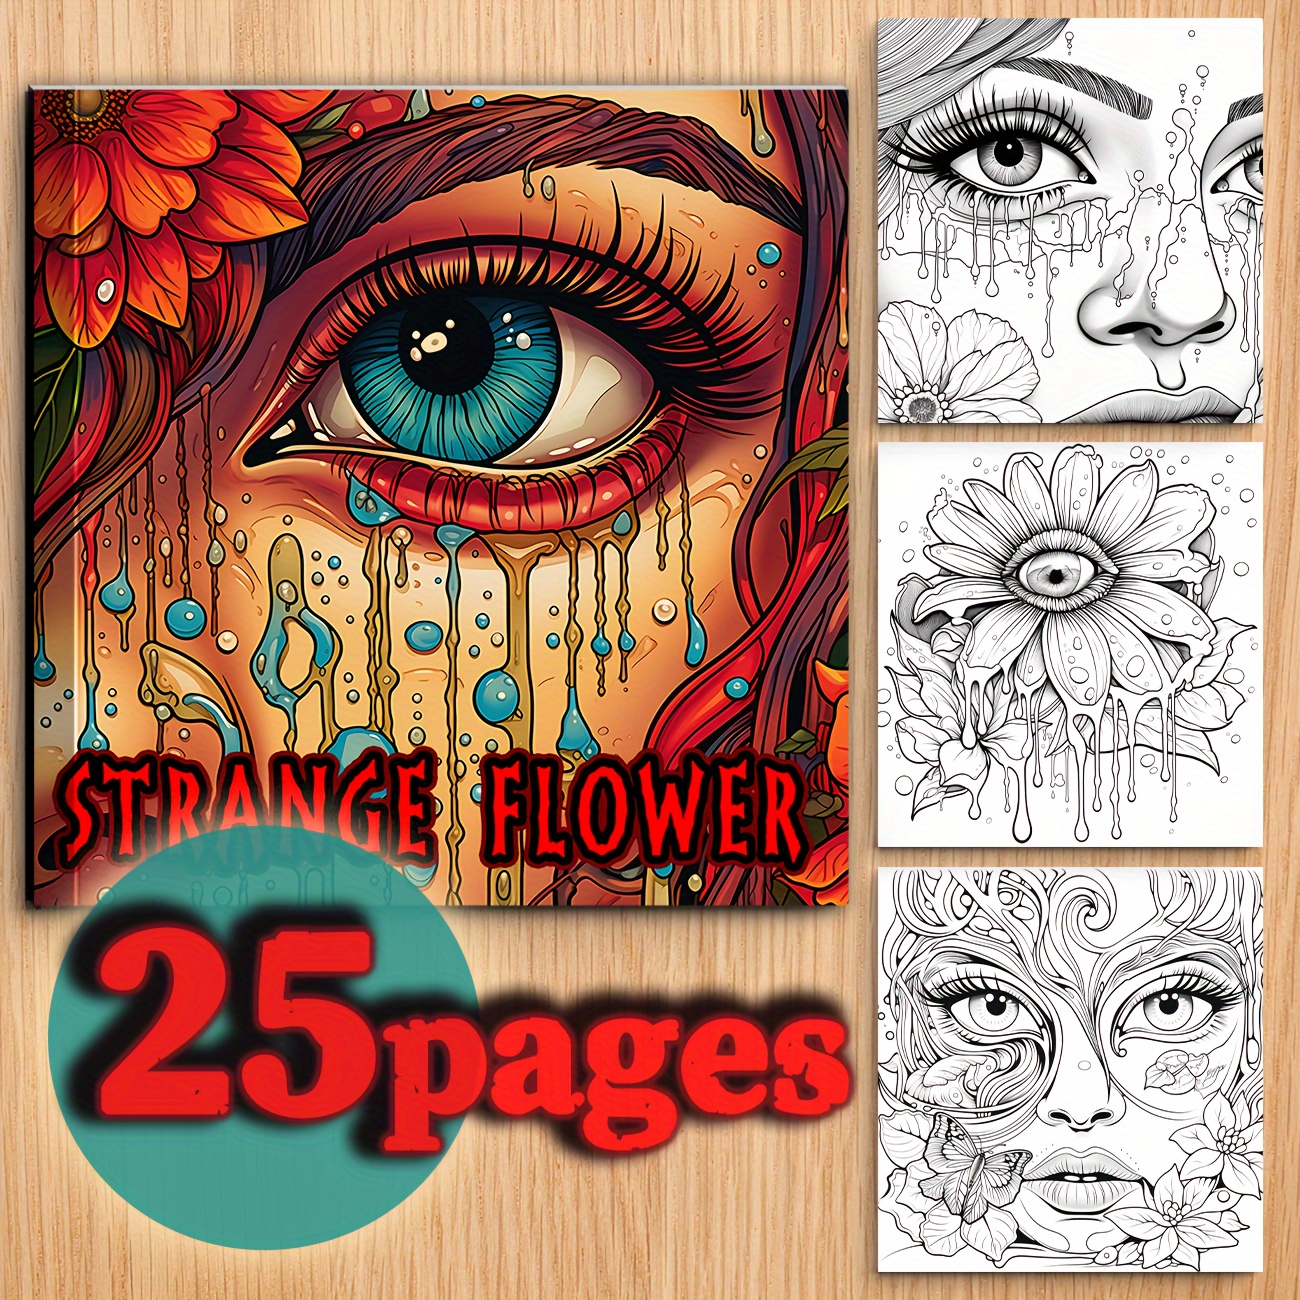 

1pc Lotus Eye Monsters Theme Coloring Book, Gifts For Festivals And Birthdays Party Gift Adult Coloring Book